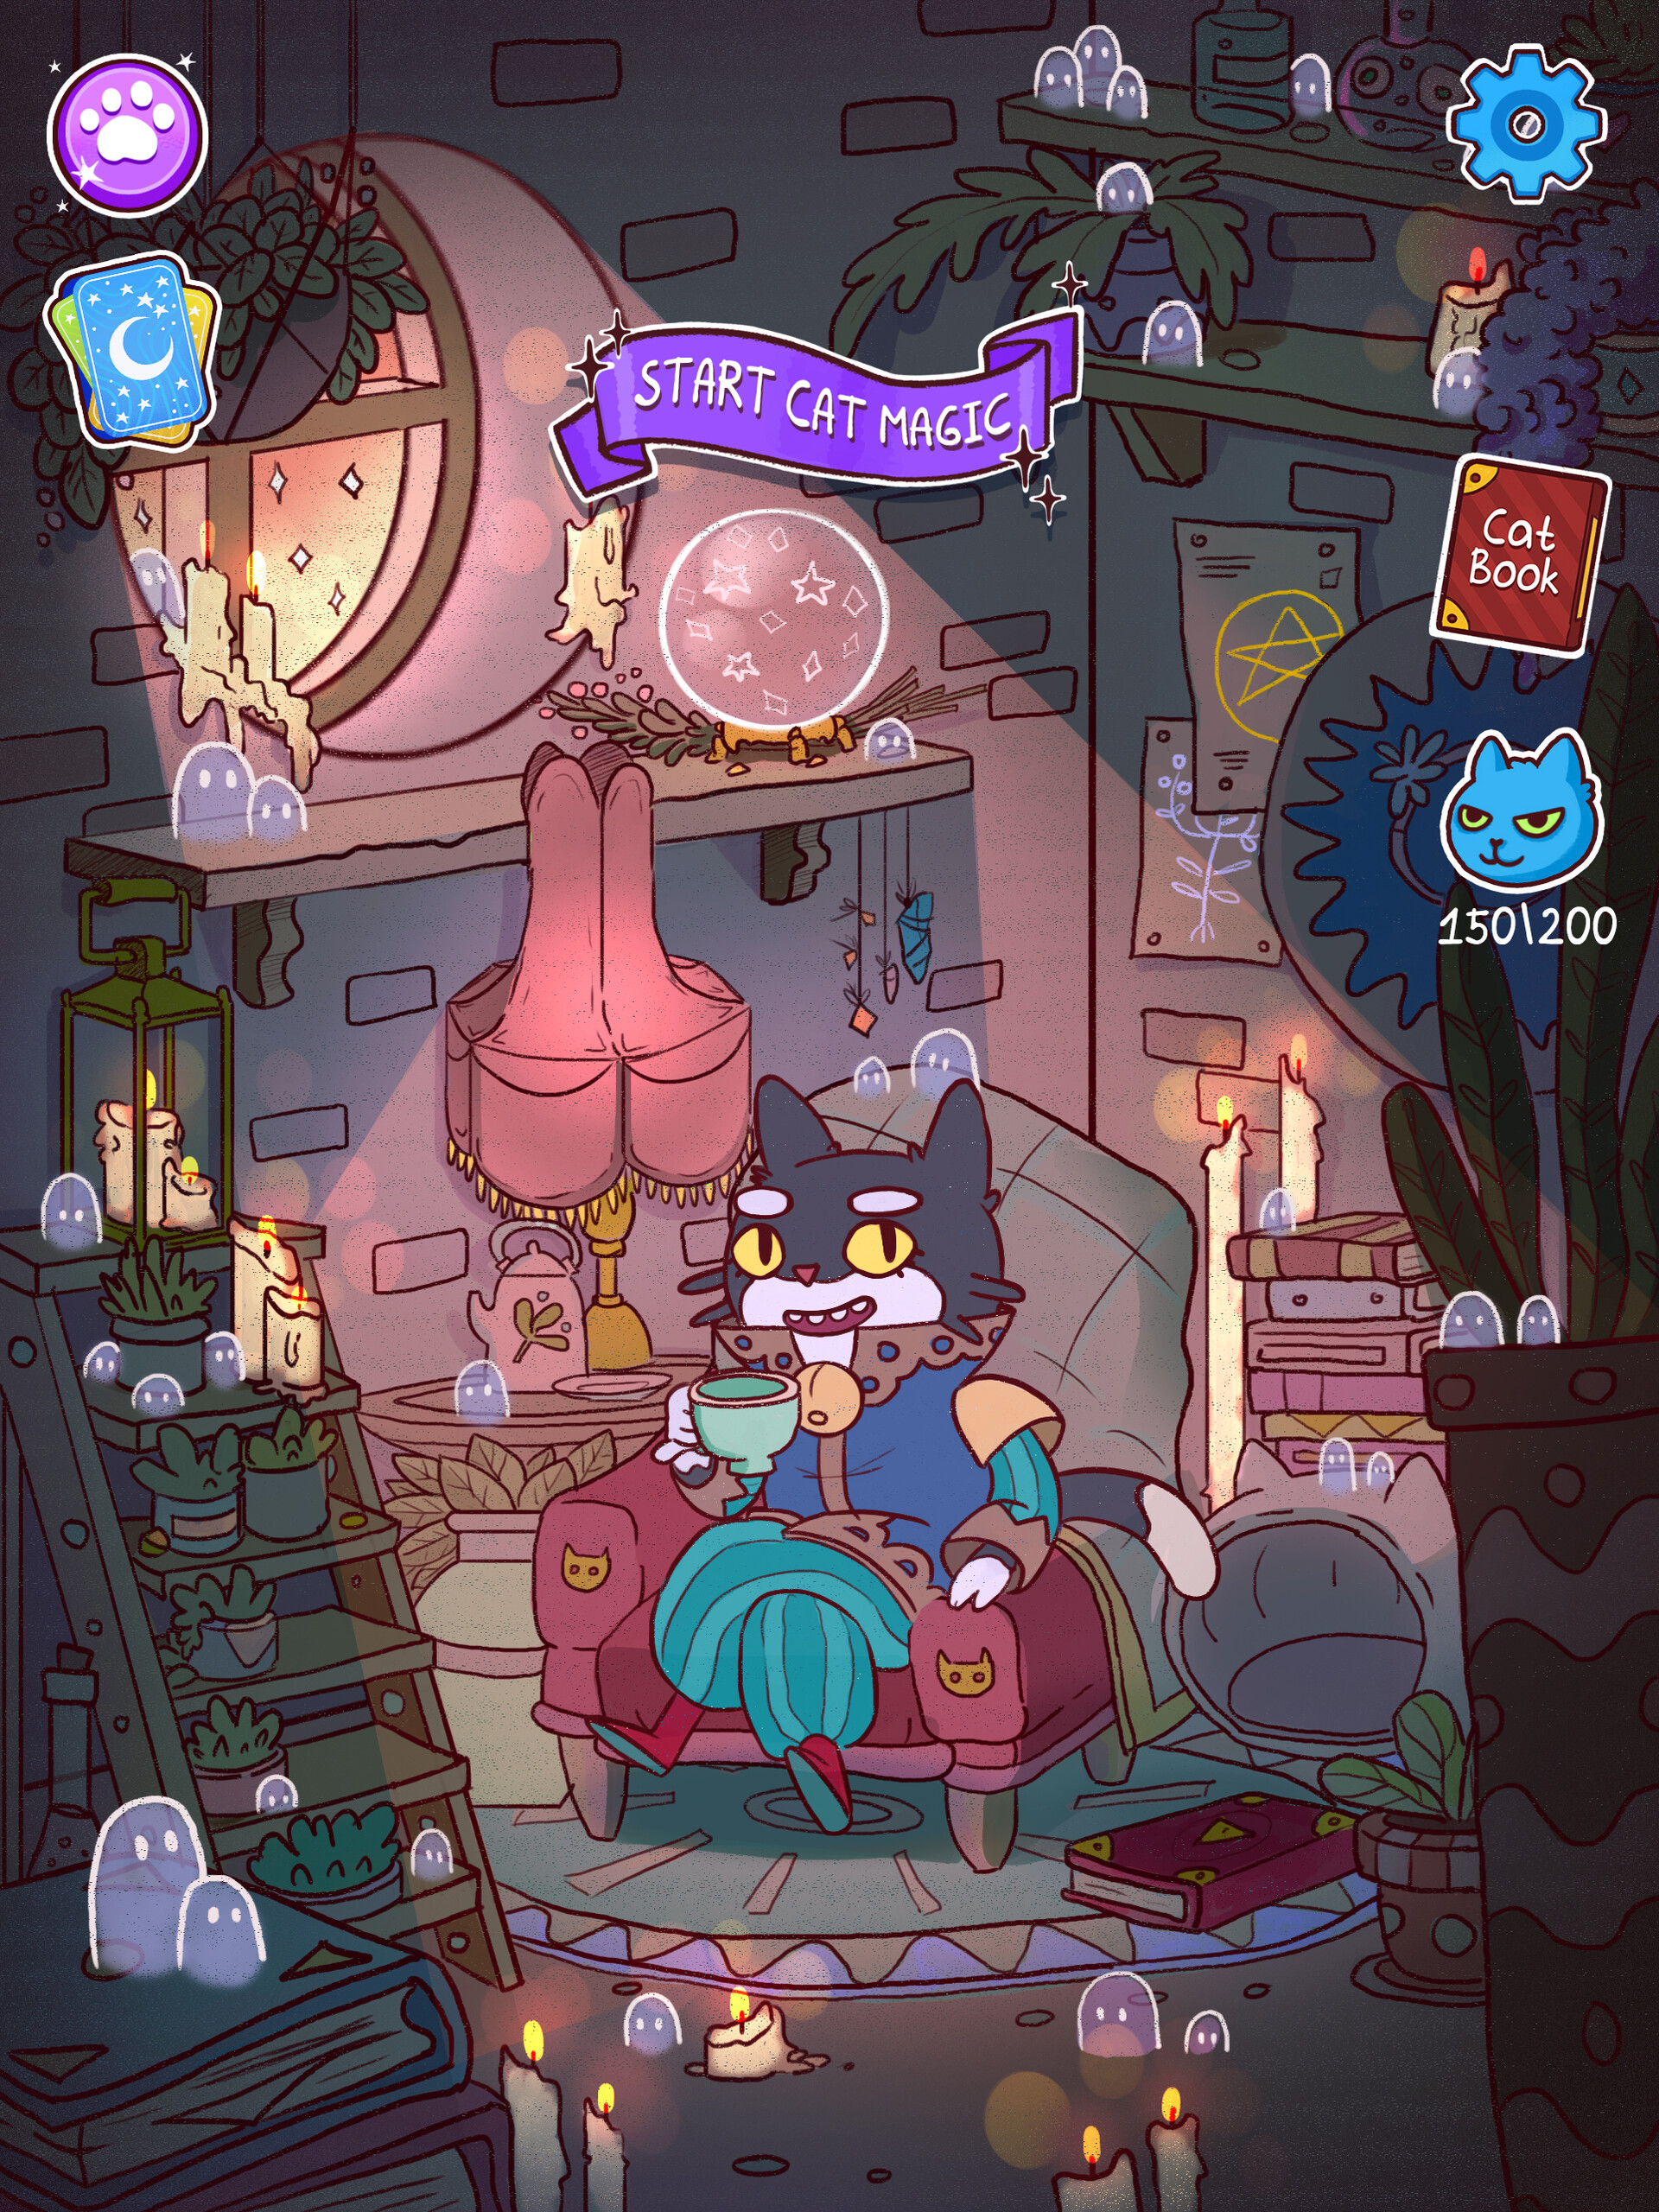 Cat in wizards clothes in a stone brick room with occult furnishings and little spirits. There are various button icons: a paw print, a stack of cards with a crescent moon on the back, a cog, a book, and a health tracker.